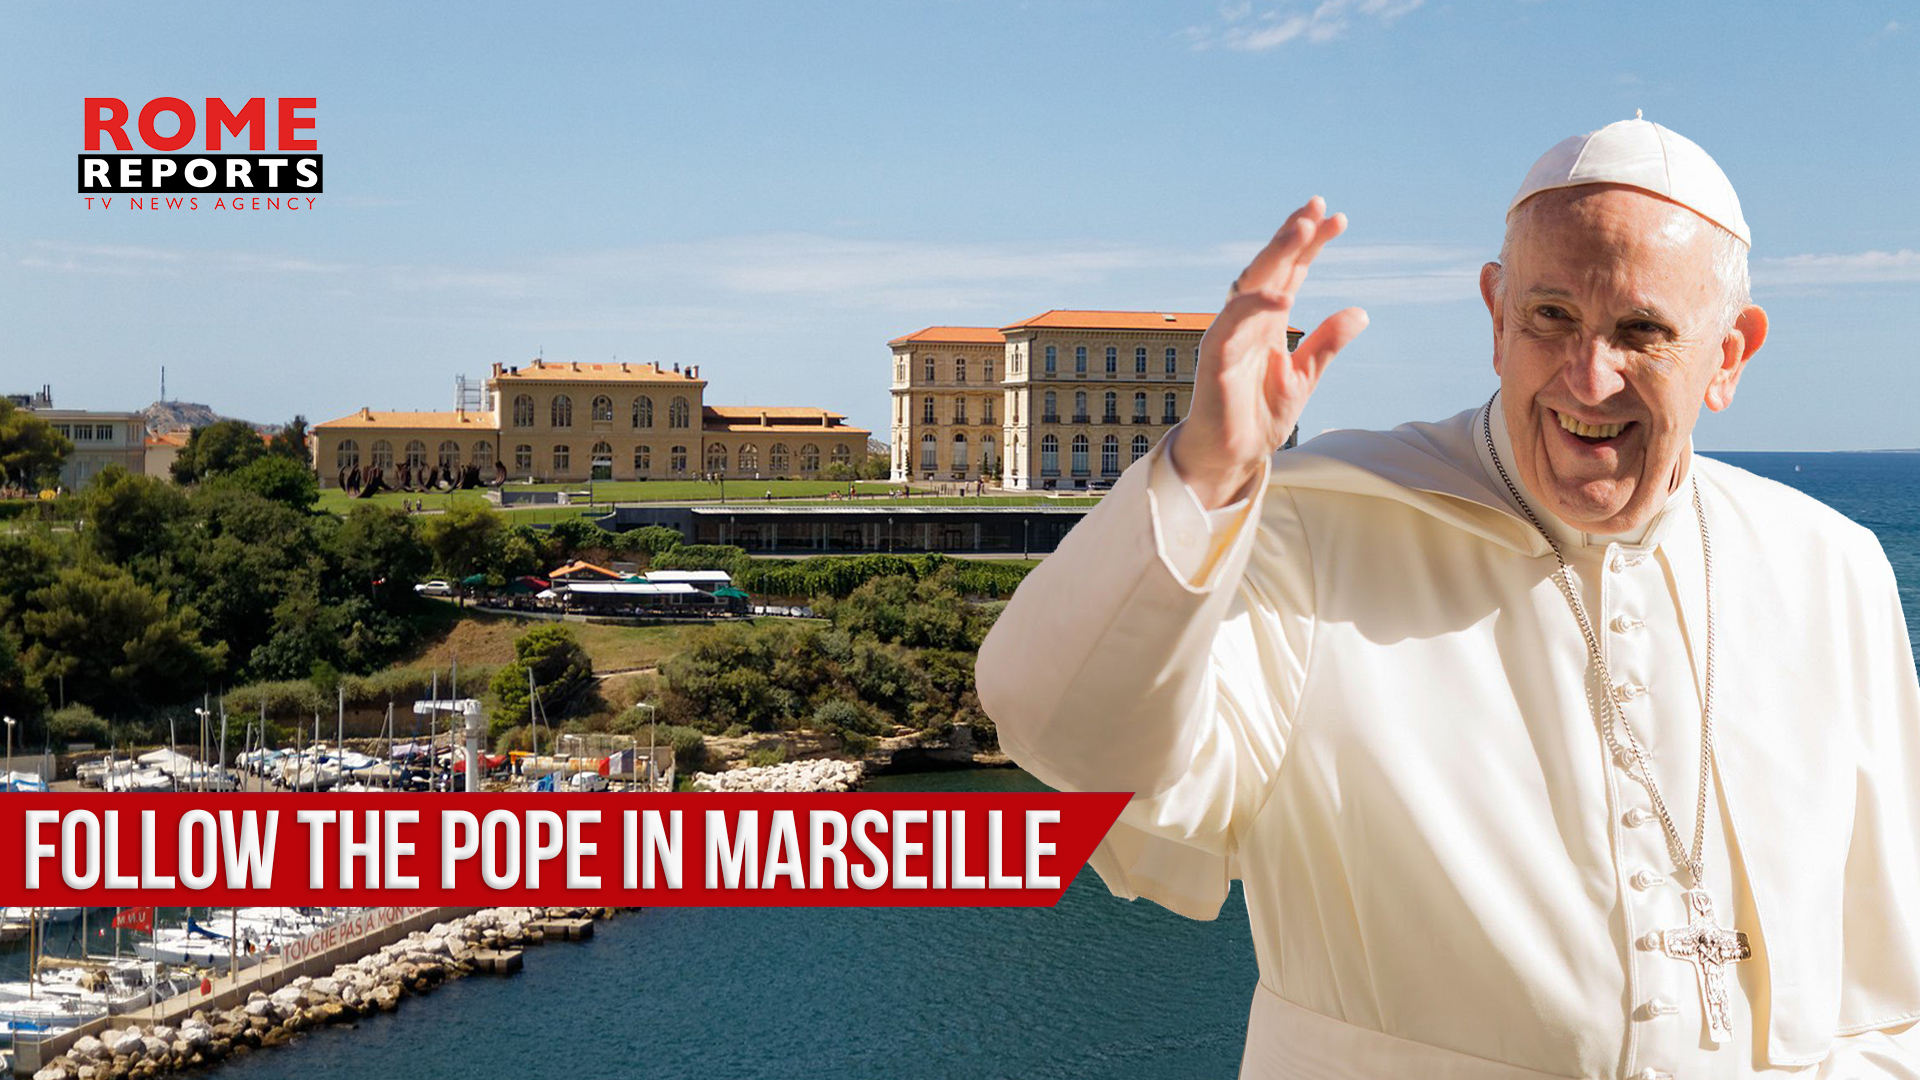 the pope's visit to marseille